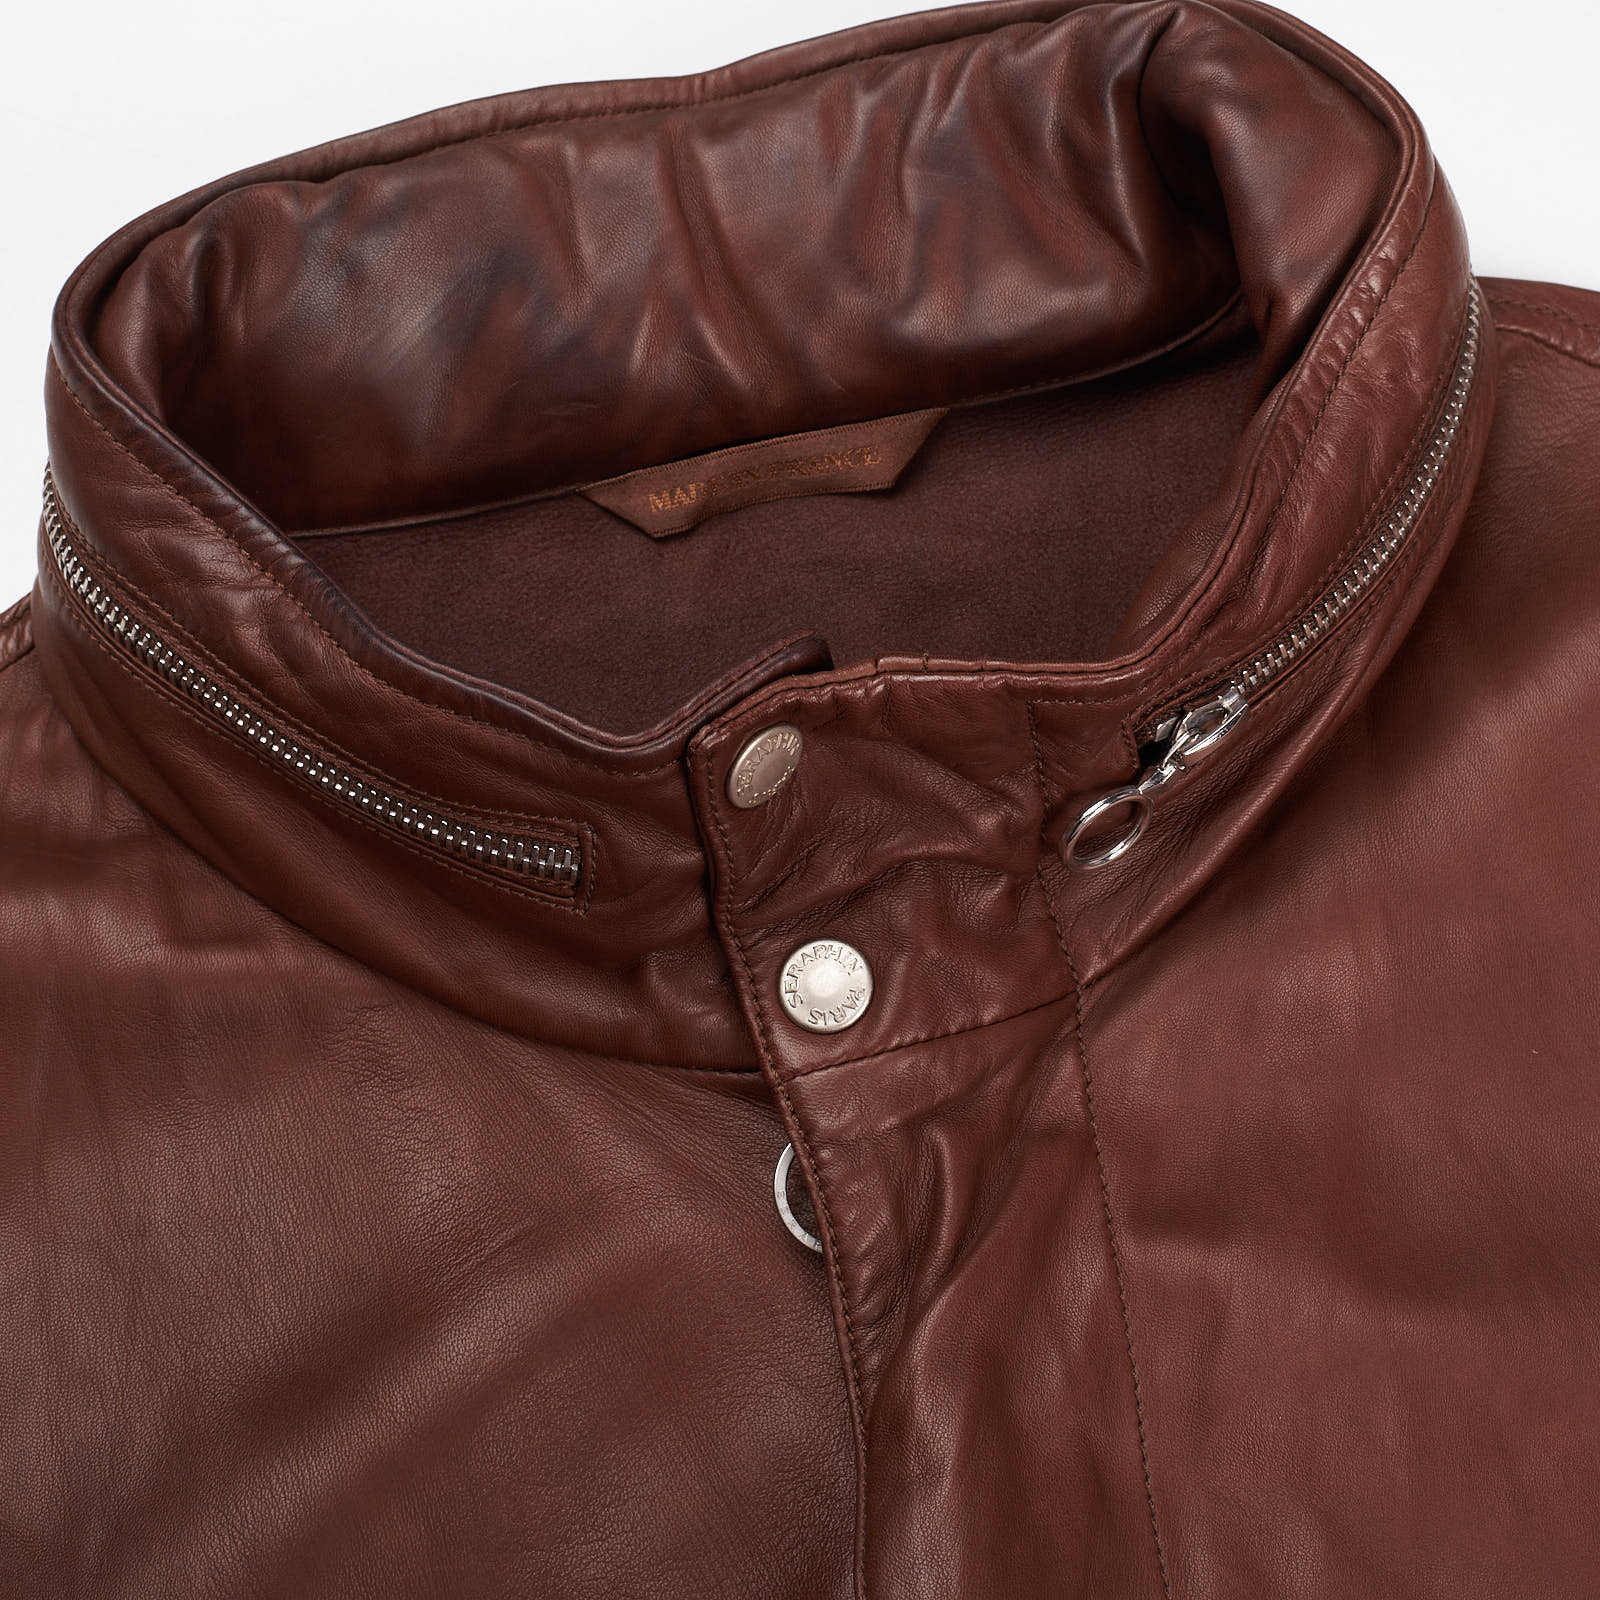 SERAPHIN Brown Lamb Leather Unlined Hooded Bomber Jacket FR 50 US M SERAPHIN